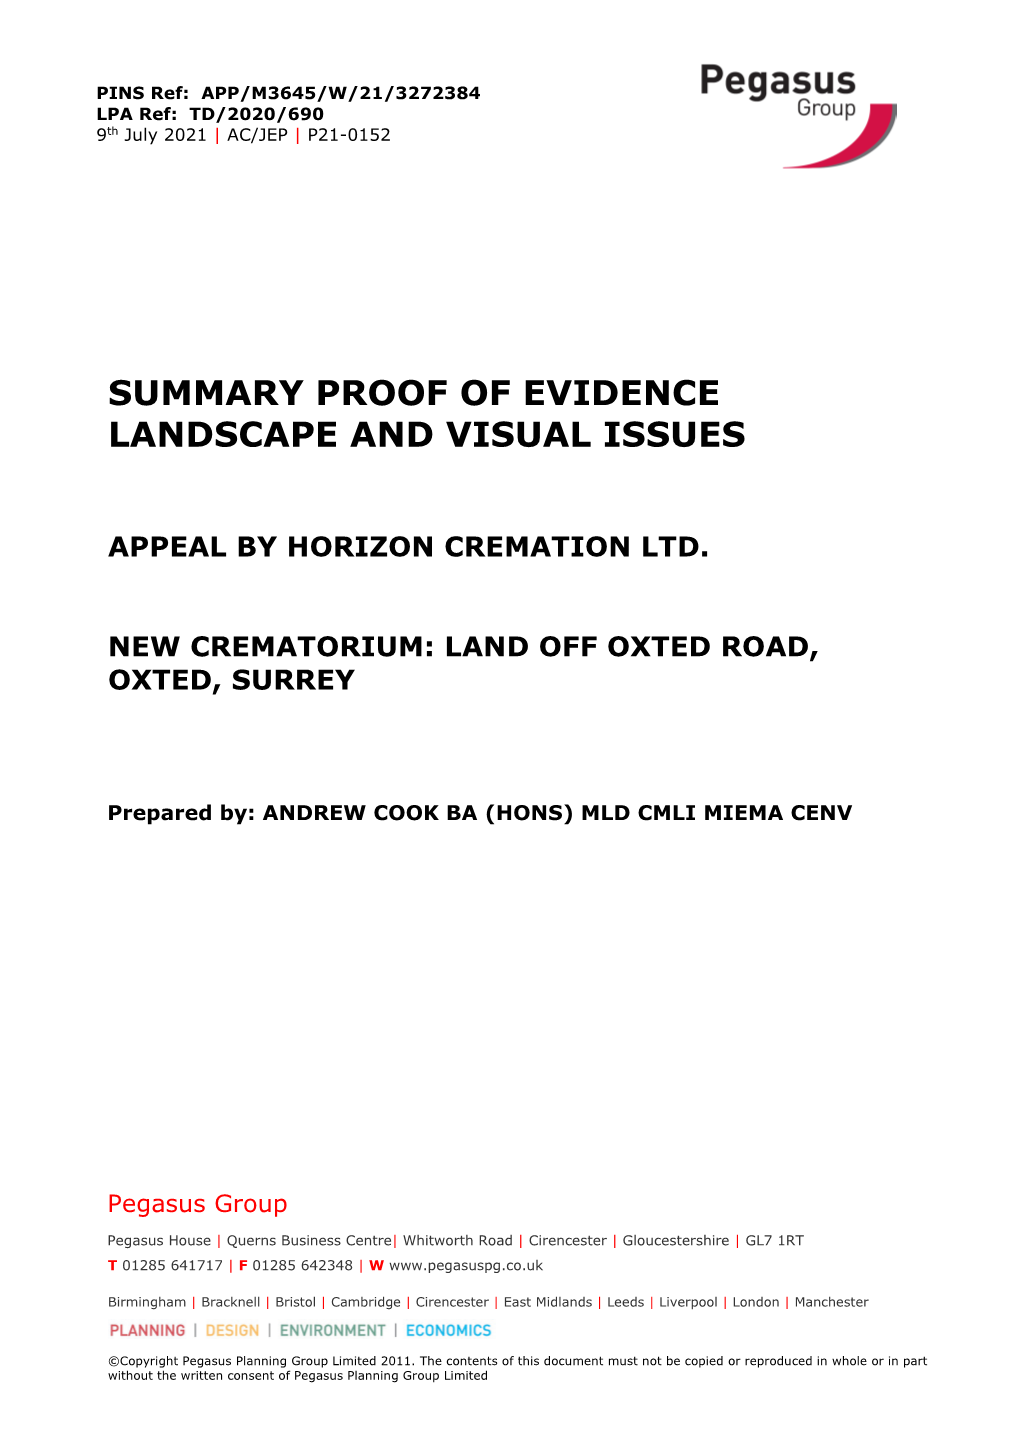 12.5 Summary of Landscape Proof of Evidence